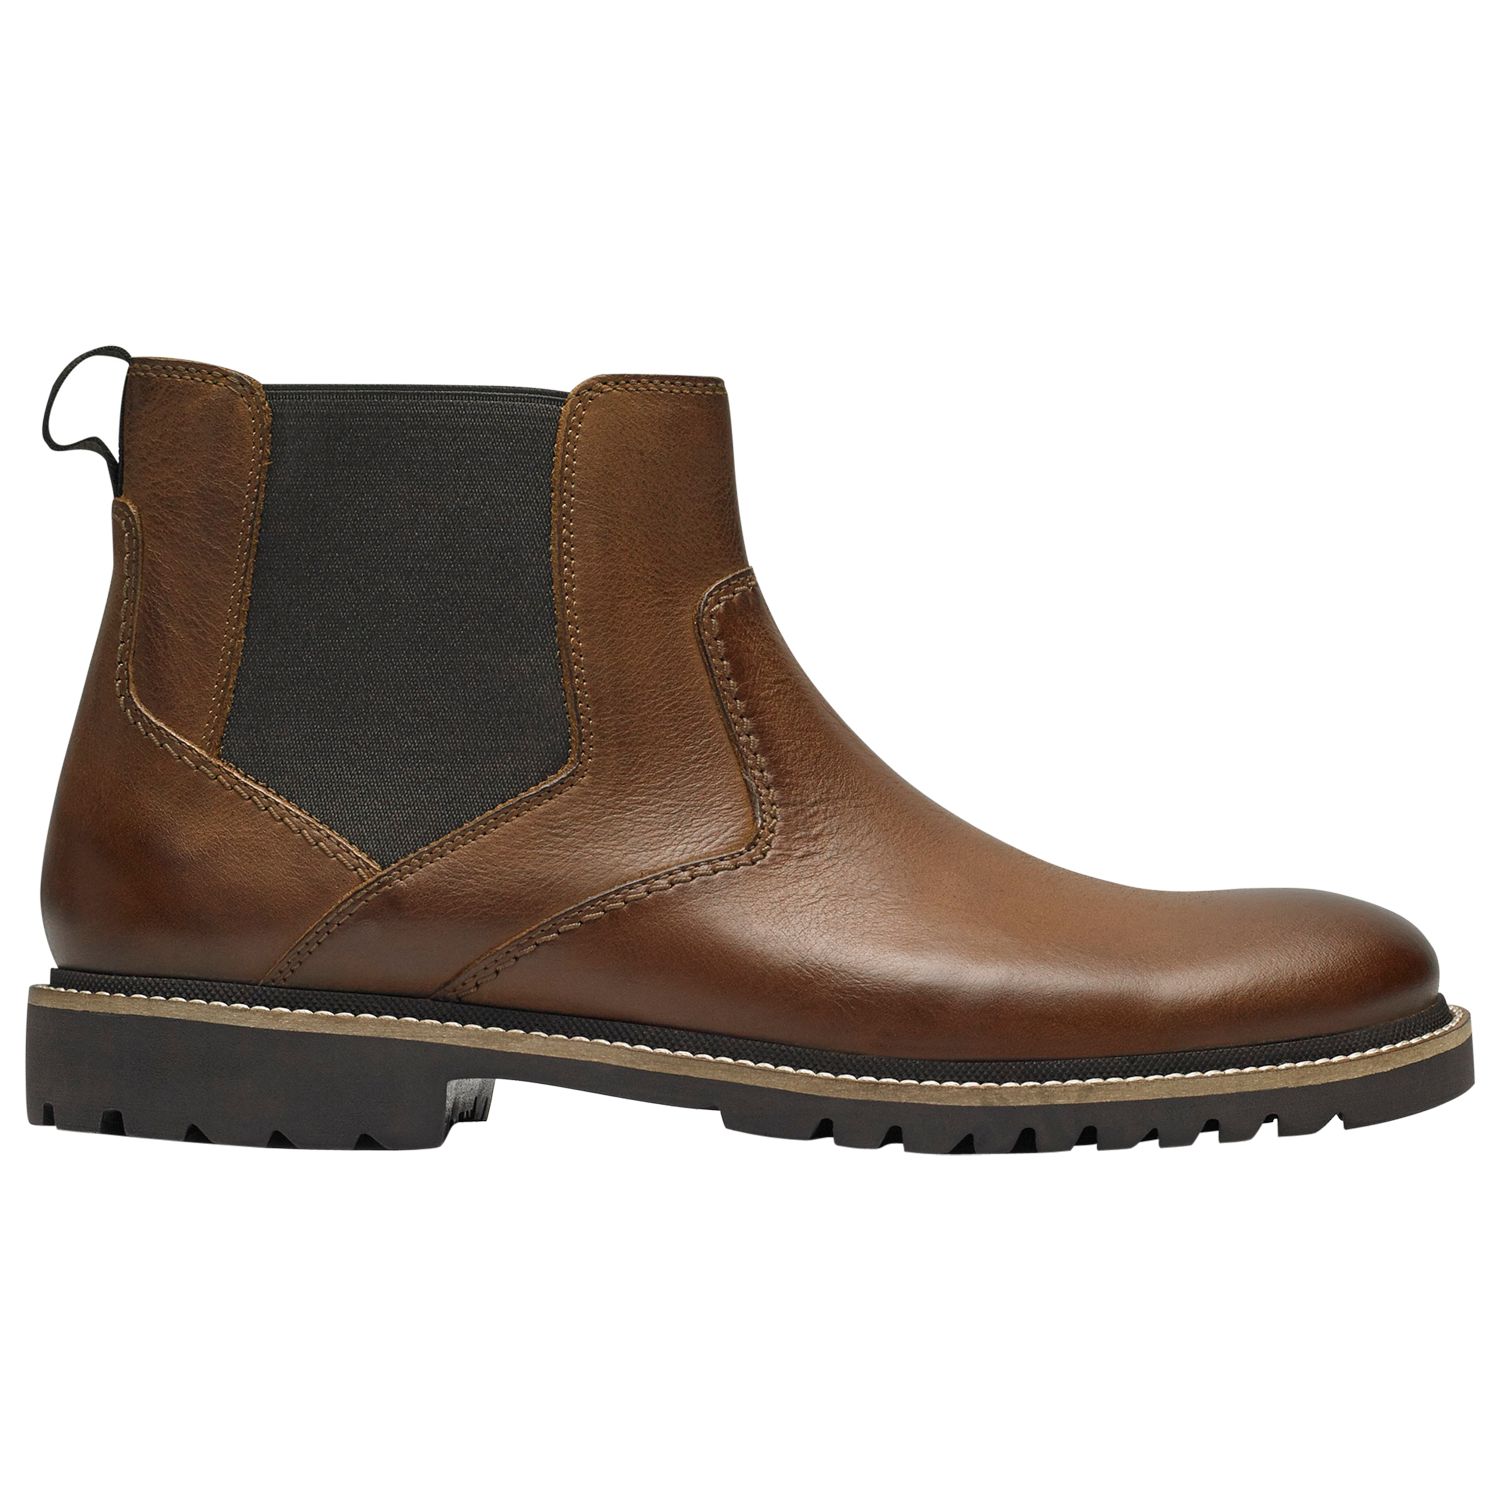 Rockport Marshall Chelsea Boots, Fawn at John Lewis & Partners